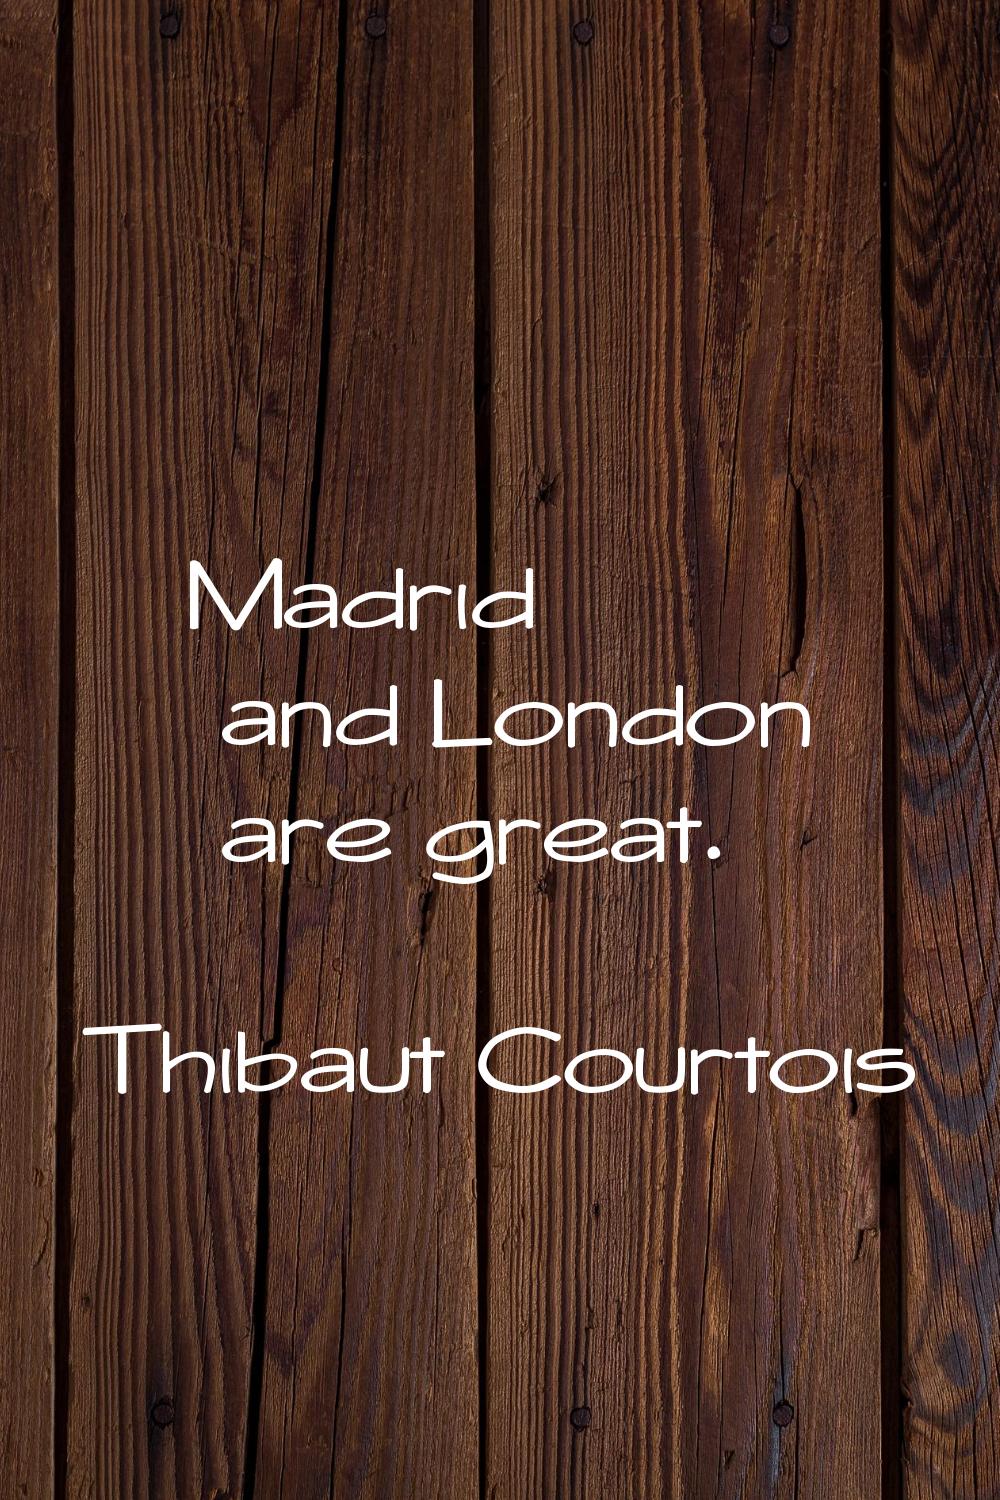 Madrid and London are great.